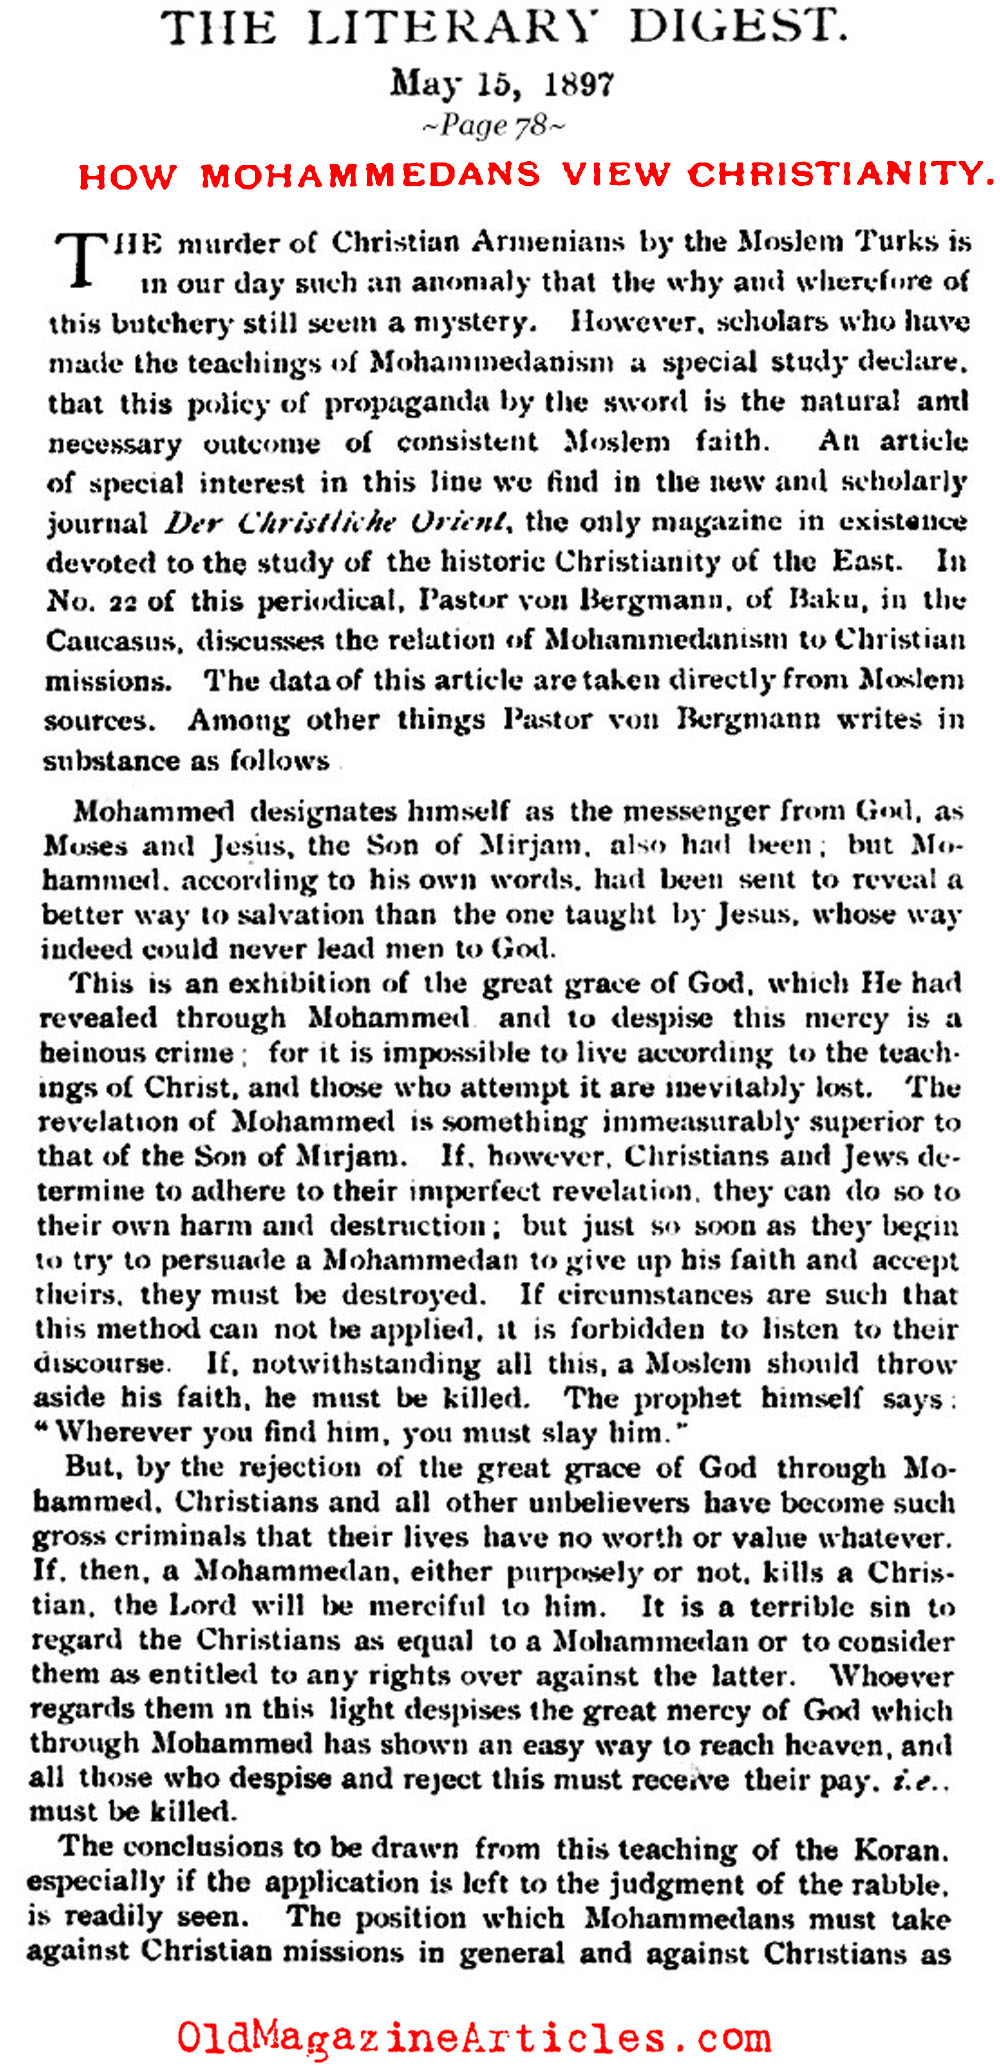 An Islamic View of Christianity (The Literary Digest, 1897)